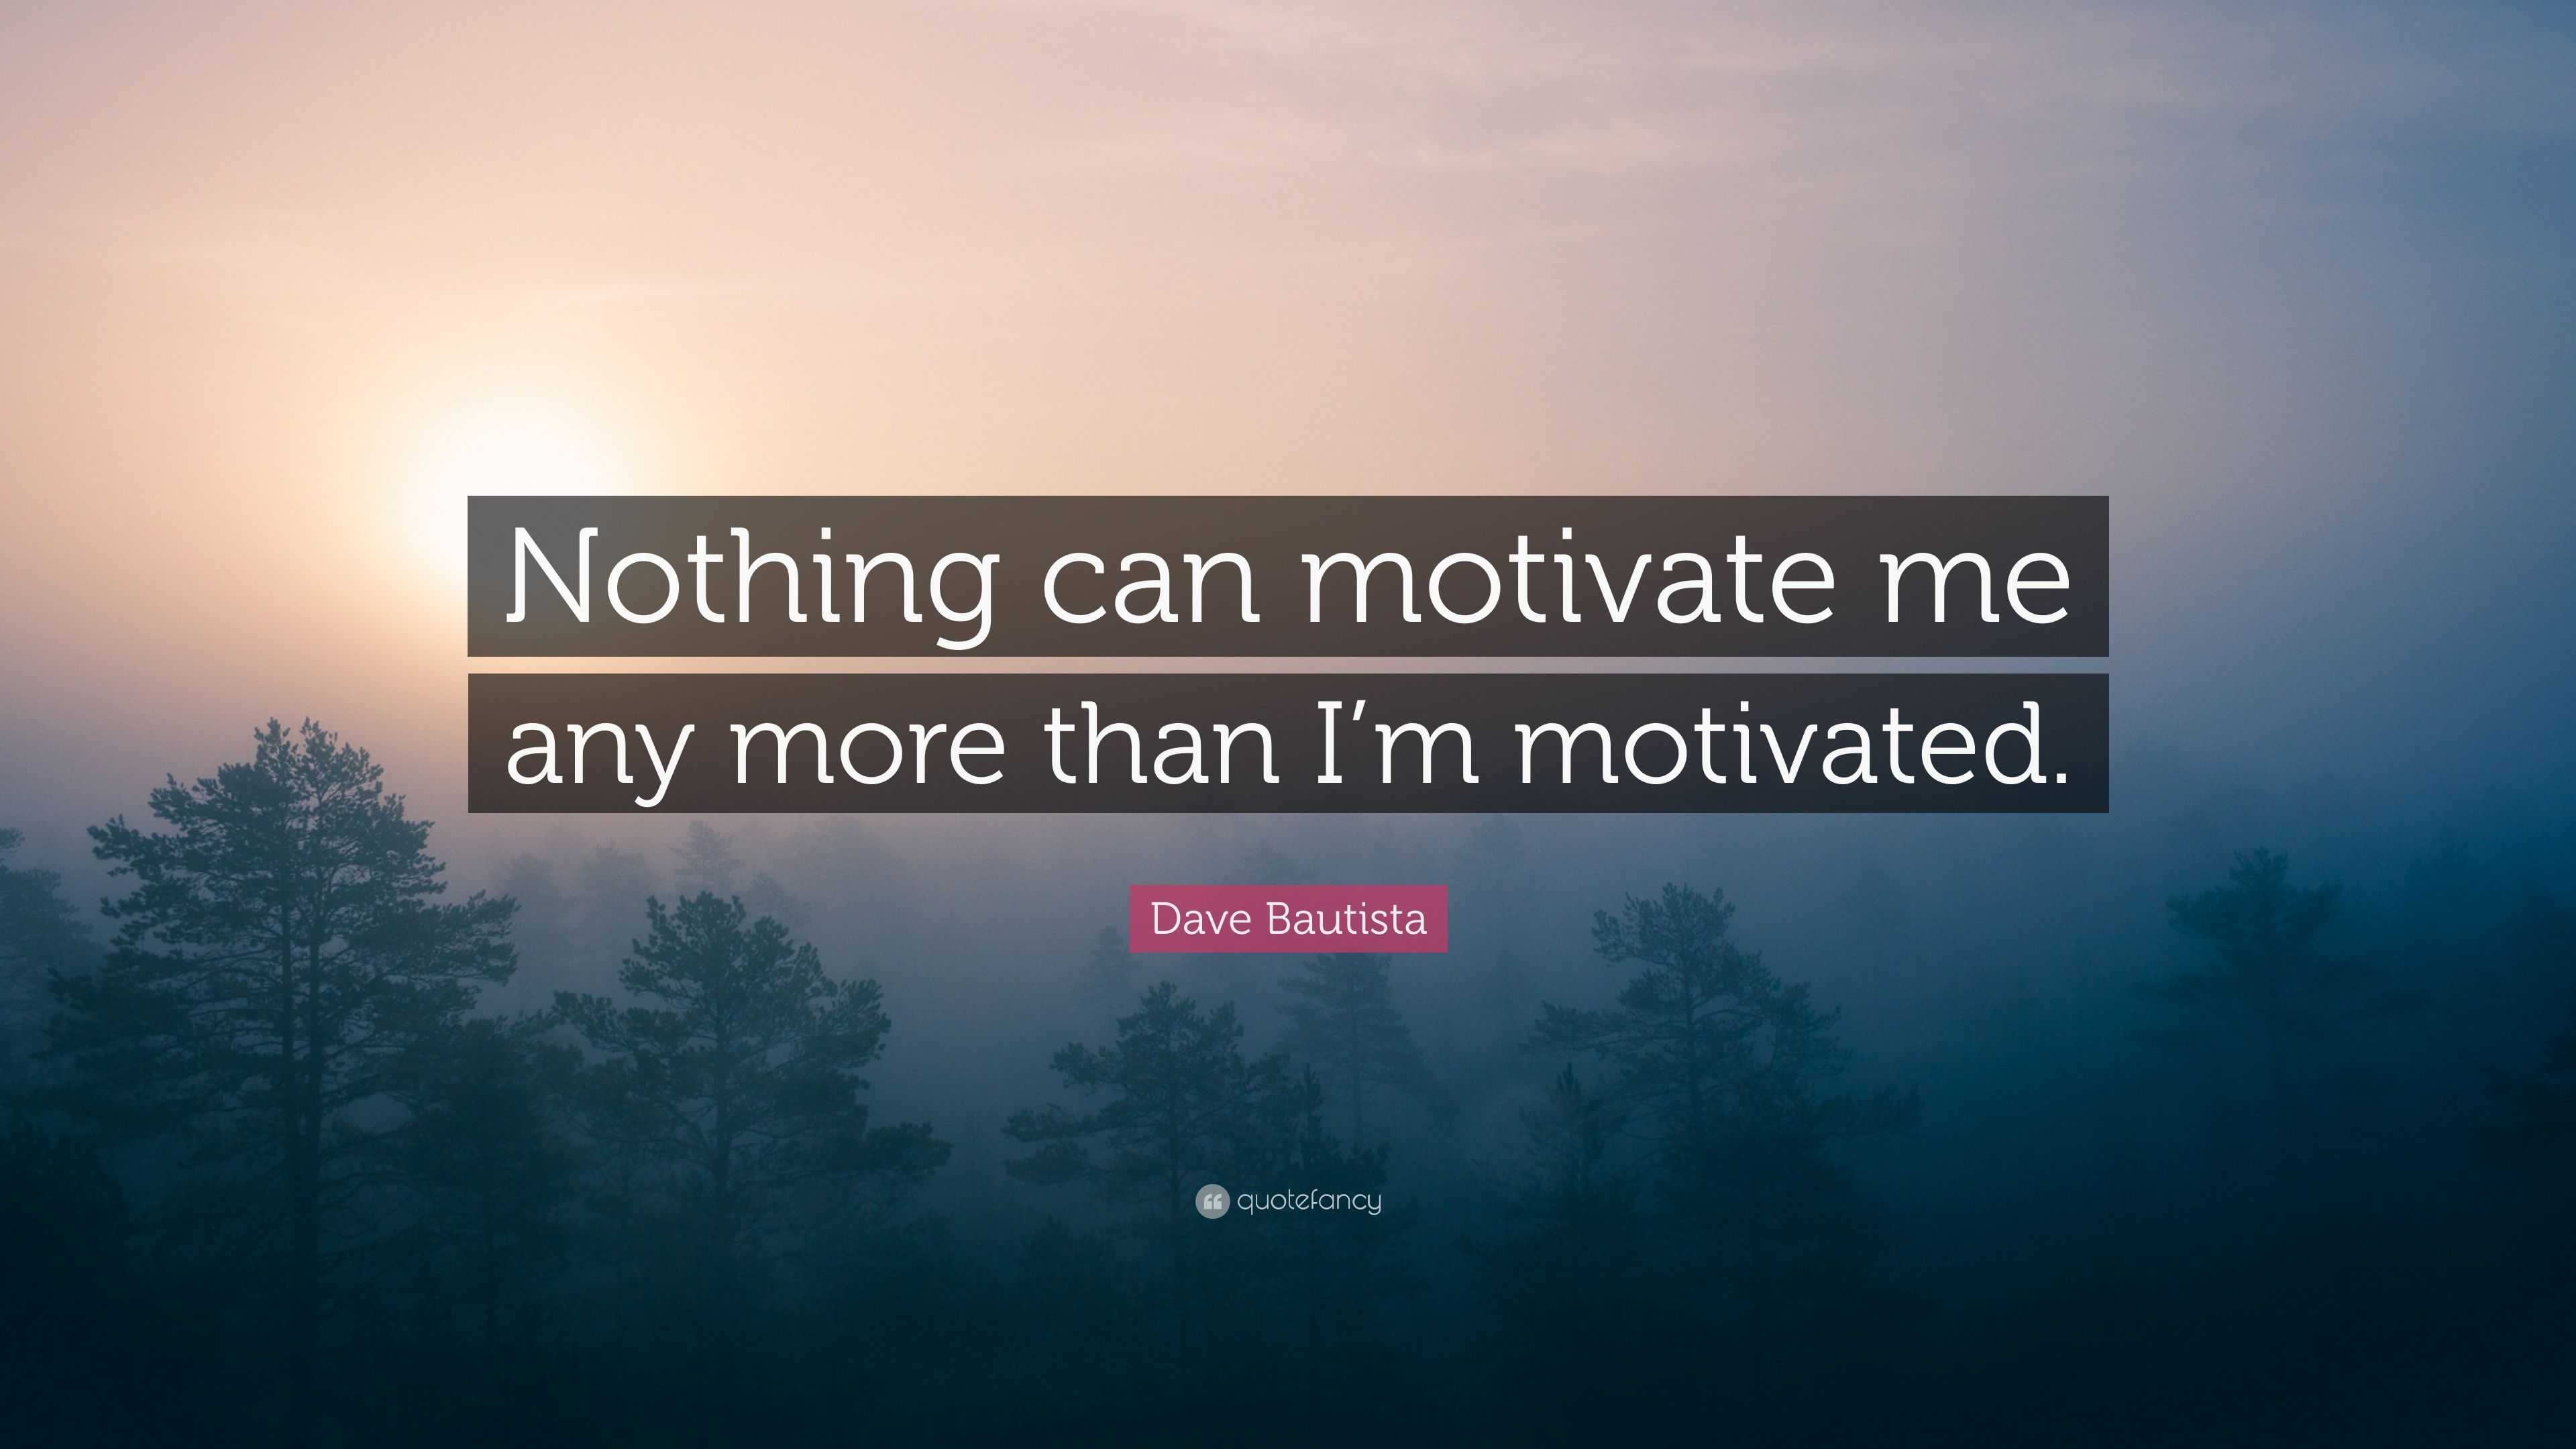 Dave Bautista Quote “nothing Can Motivate Me Any More Than Im Motivated” 